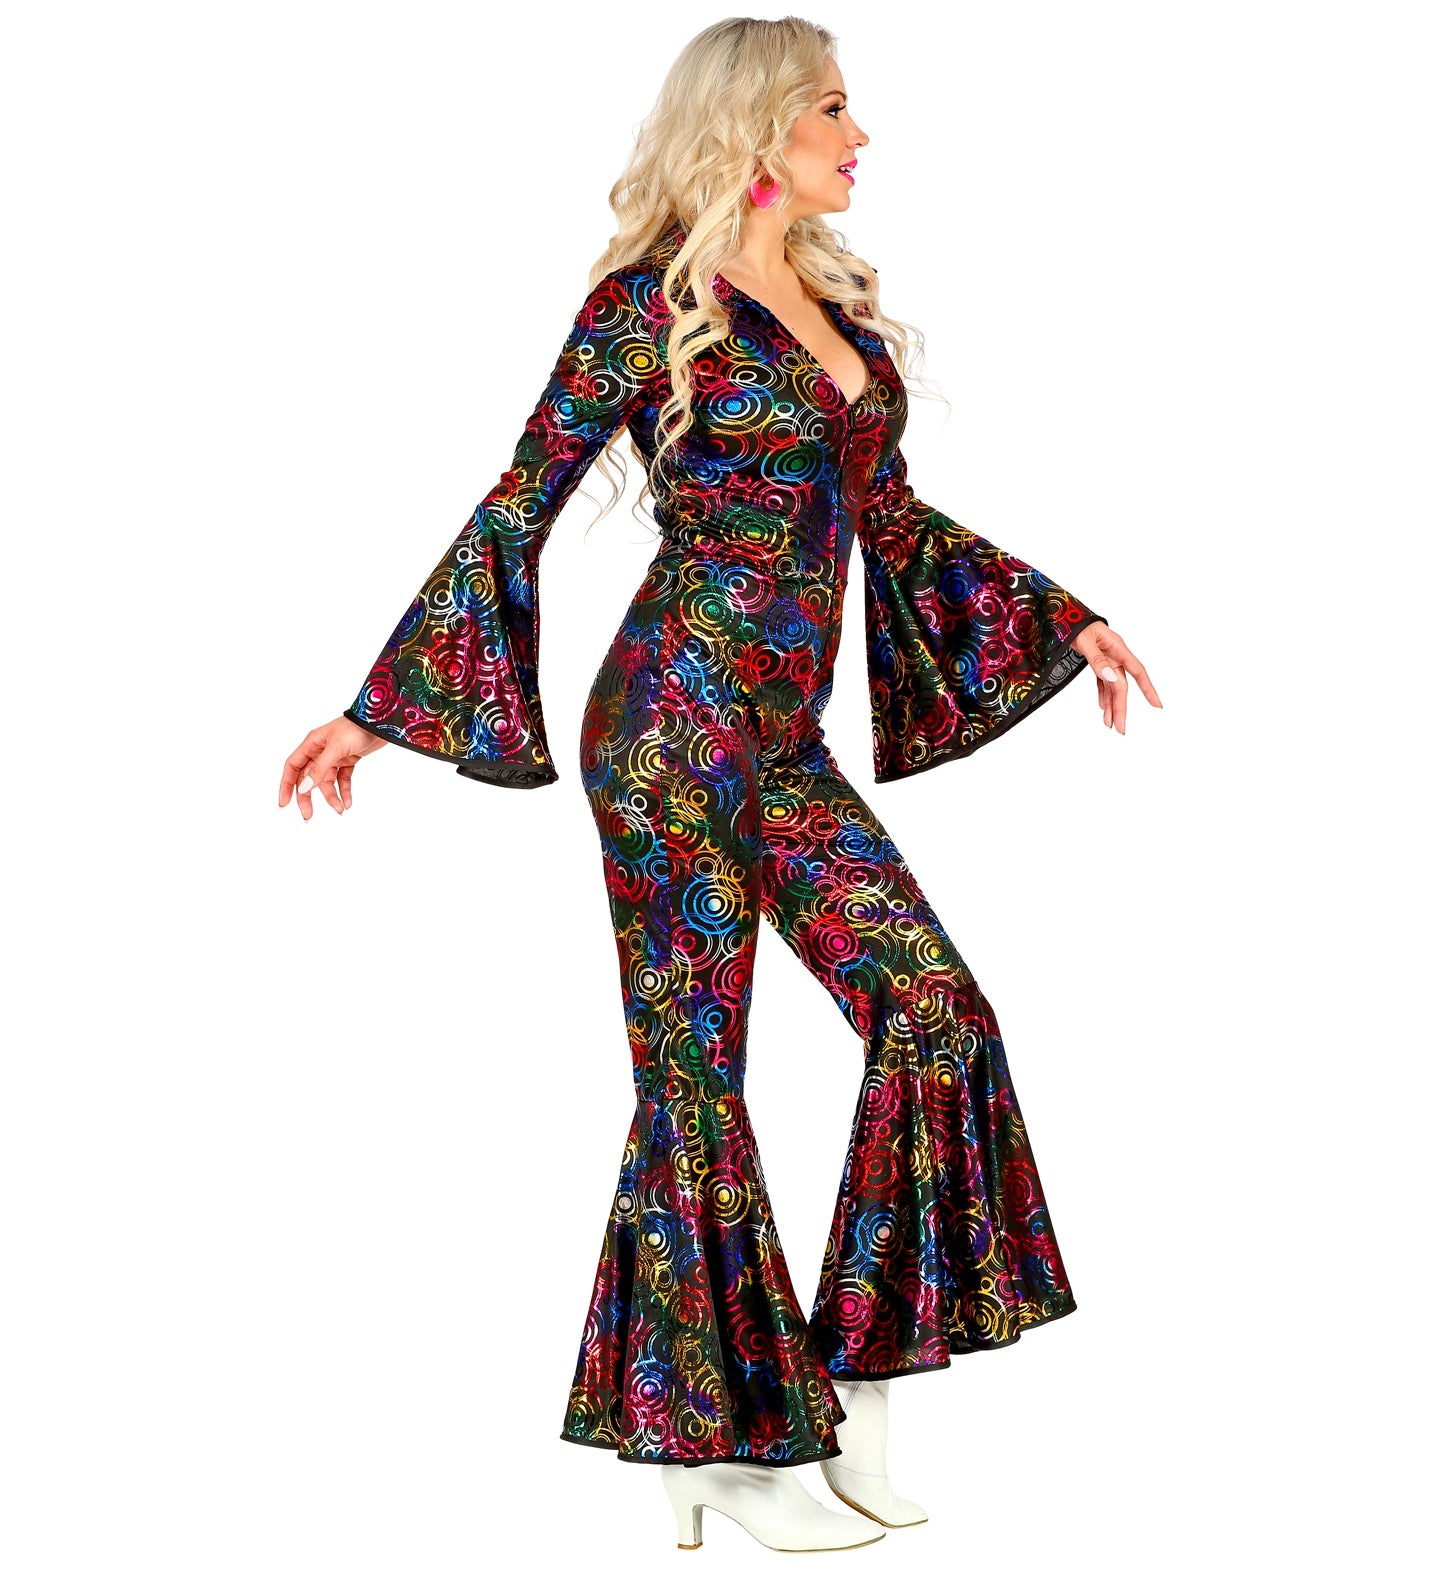 1970's Disco Fever outfit for women